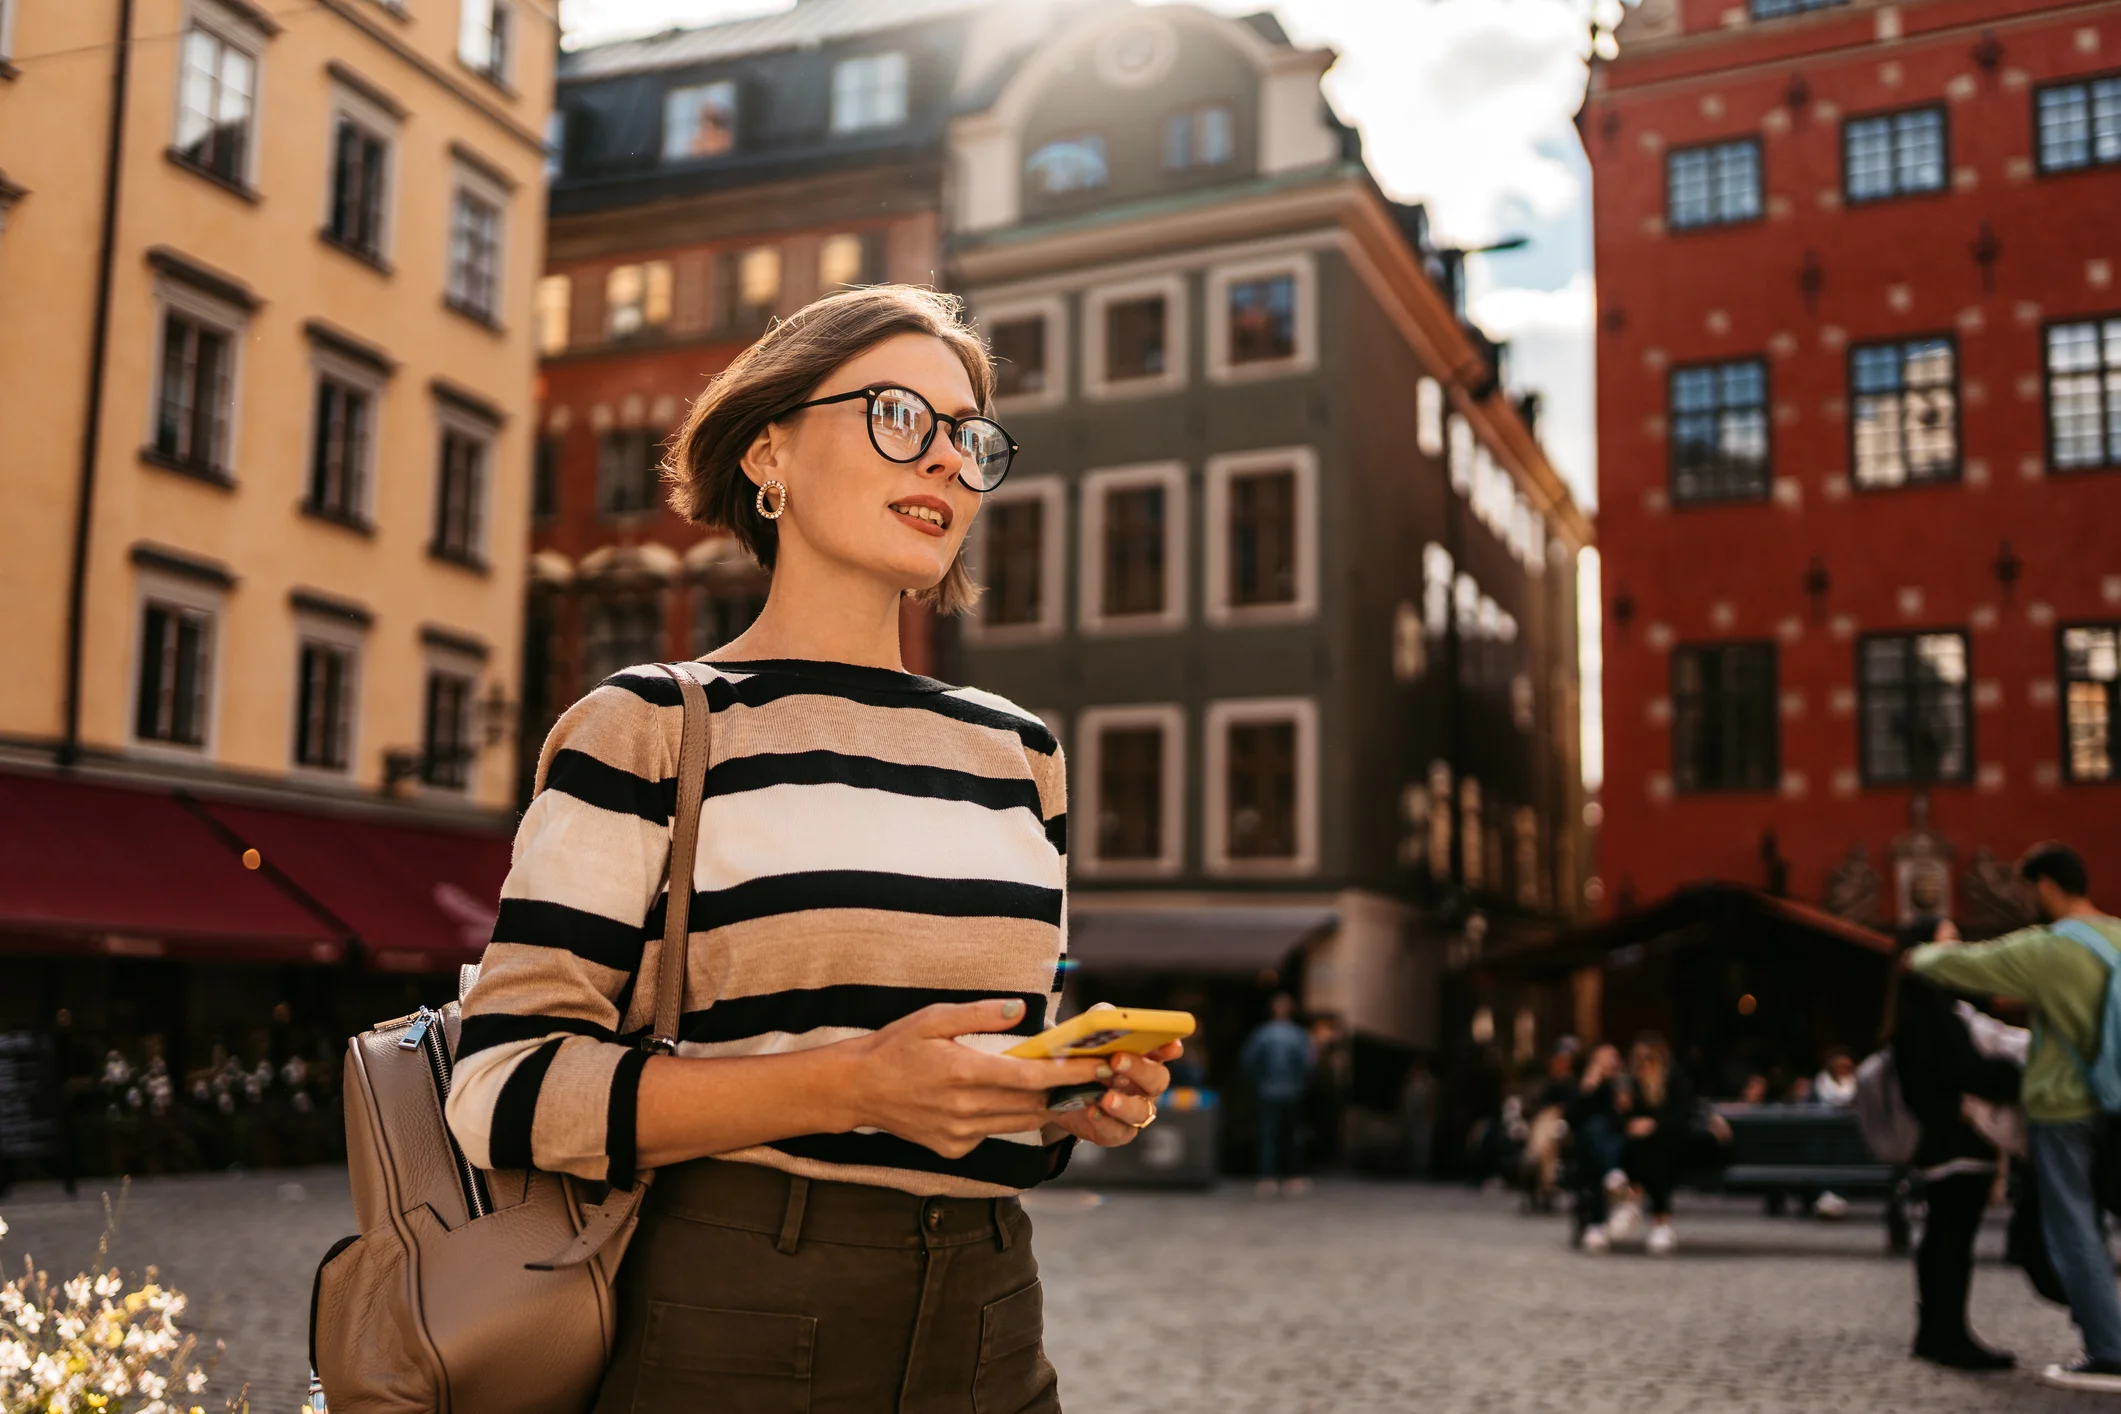 Five key steps for setting up your life in Sweden